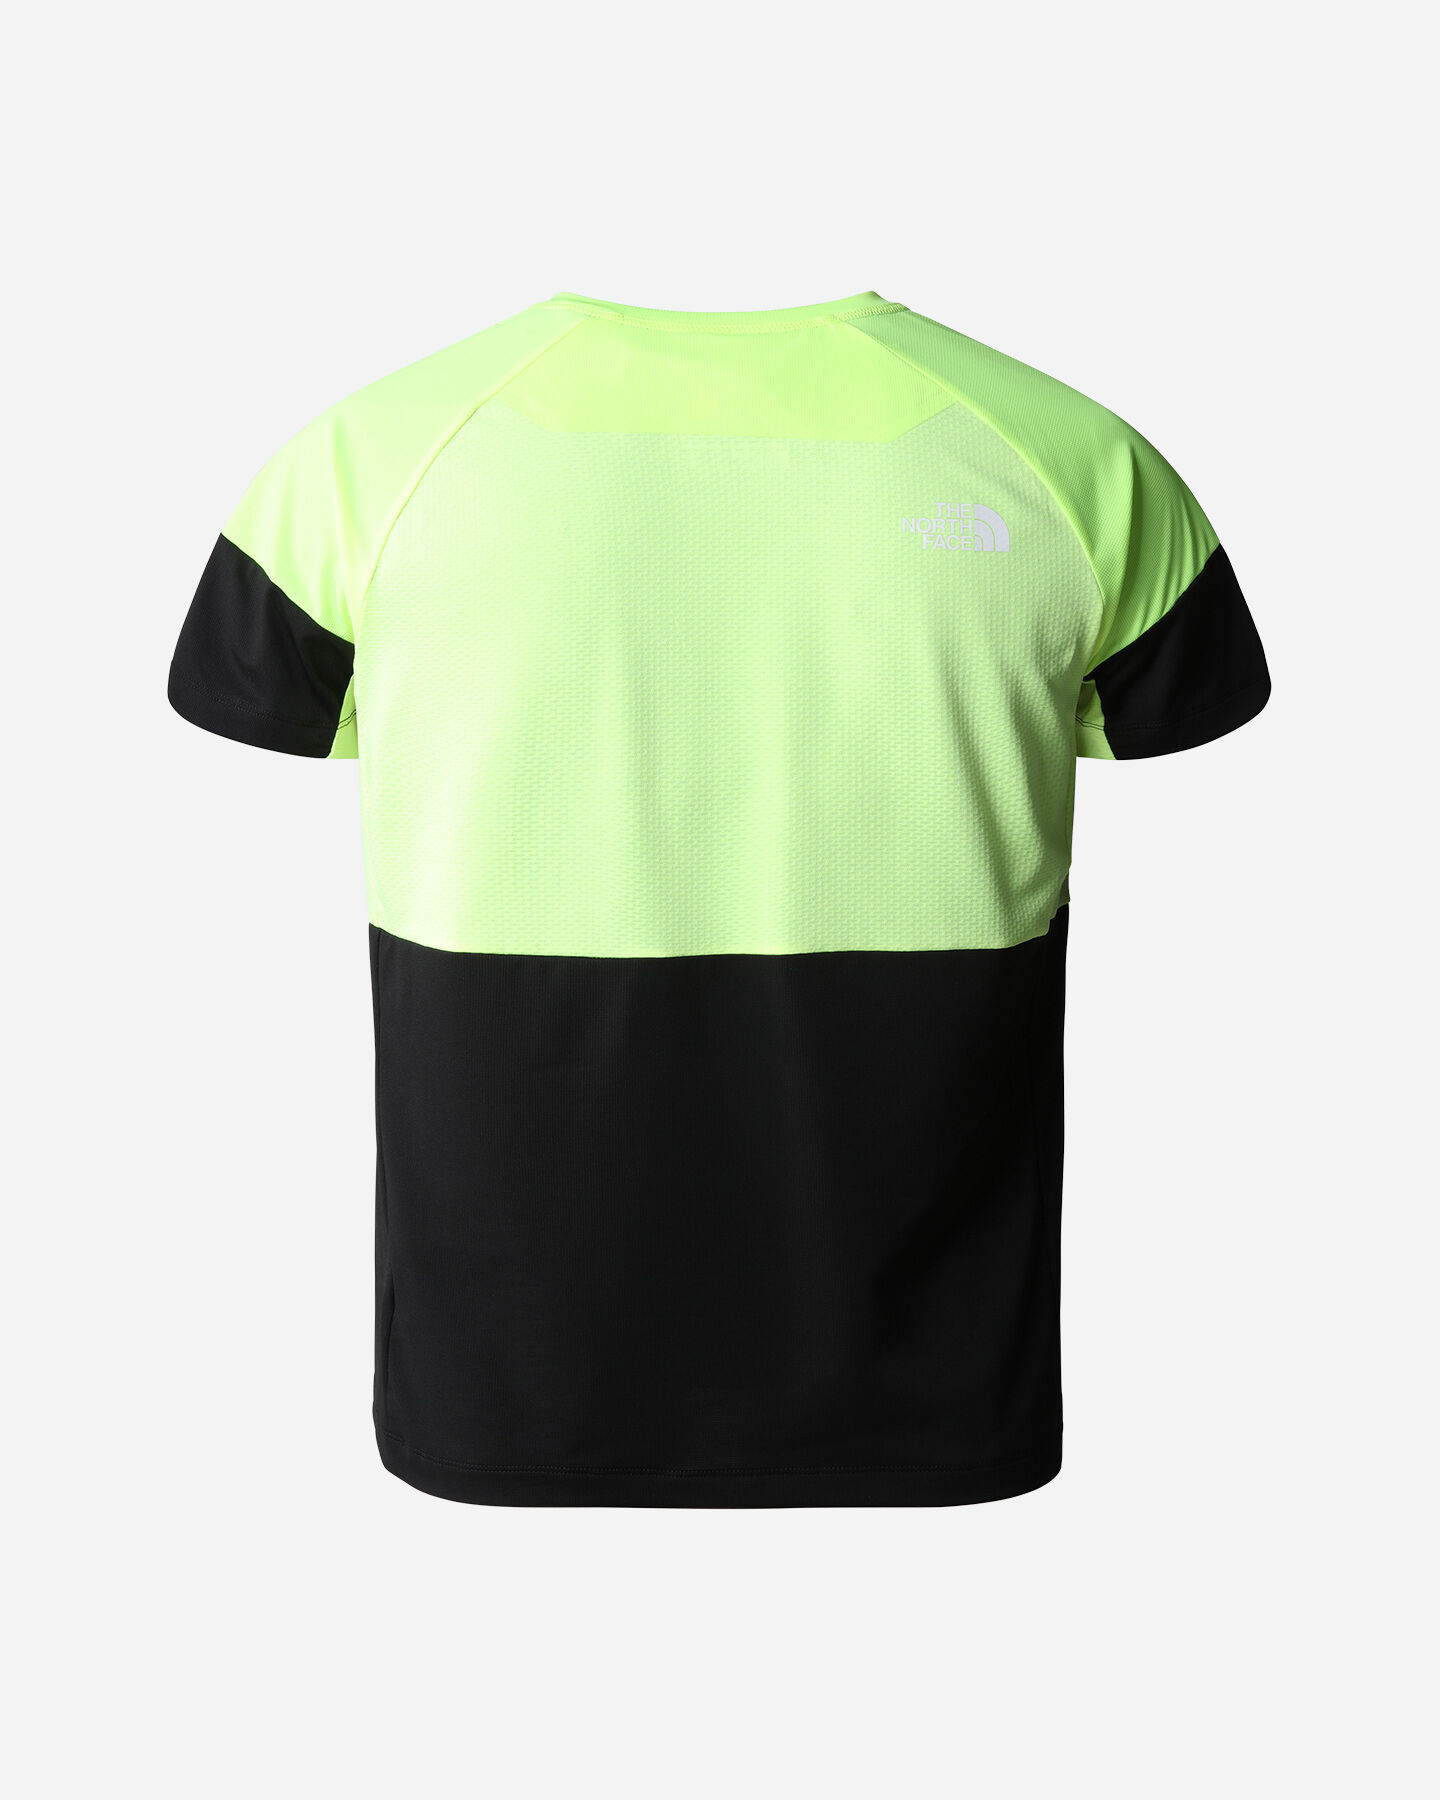  T-Shirt THE NORTH FACE BOLT TECH M S5537080 scatto 1